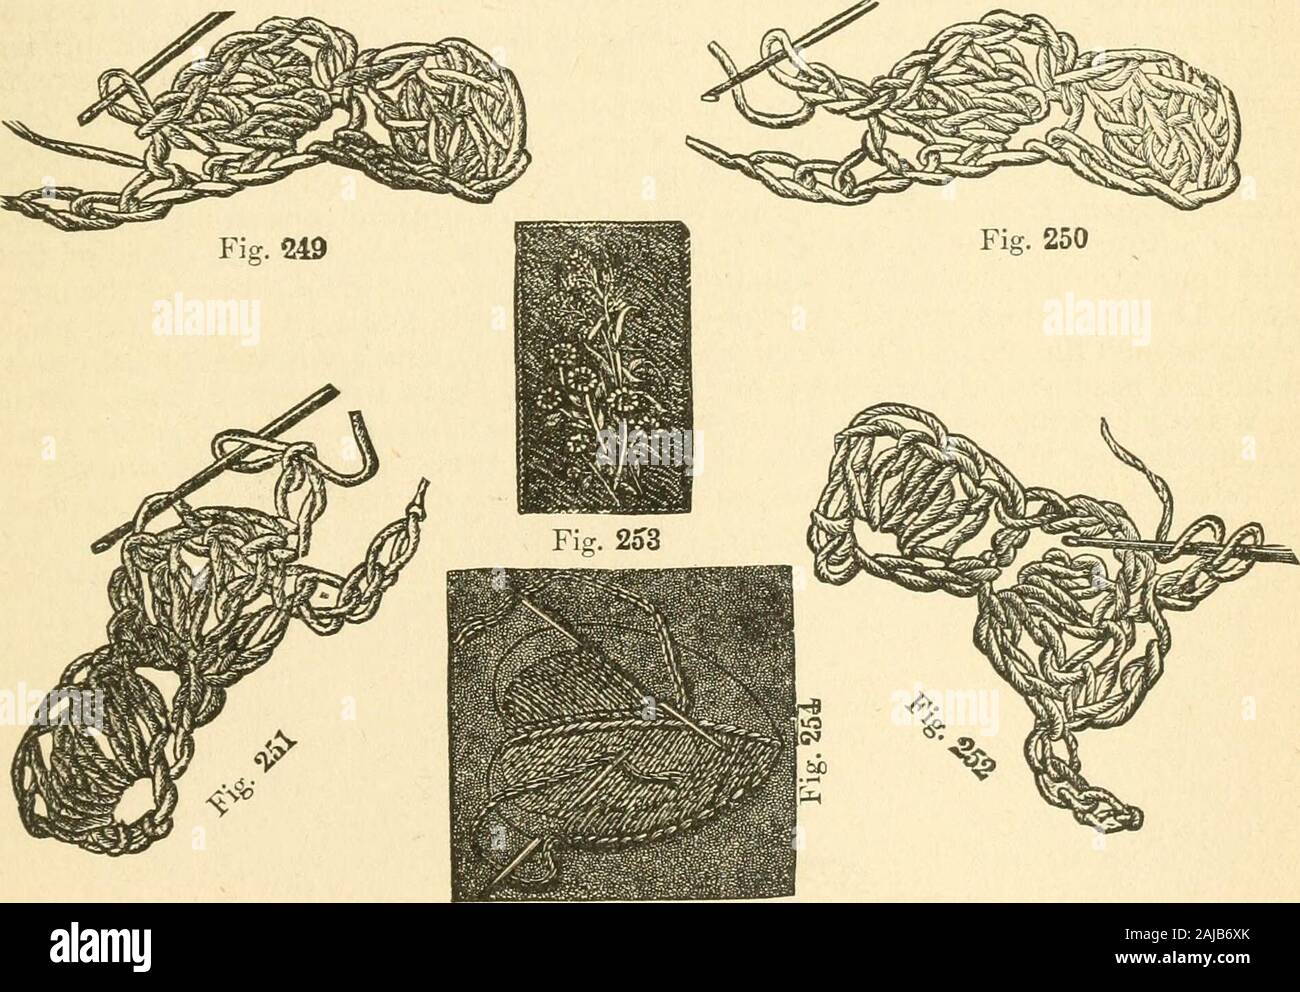 The international encyclopedia of scientific tailor principles, for all kinds and styles of garment-making .. Also designing .. embroidery, crocheting, knitting, worsted work, fancy and artistic needle work .. . Fig. 248. International Embroidery and Crochet-Stitches. 184 THE ENCYCLOPEDIA OF GARMENT-MAKING, International Embroidery and Crochet-Stitches. PLATE XXXIII. Figures 240, 241, 242, 243, 244, 245, 246, 247, 248, 249, 250, 251, 252, 253, and 254. Figure 240, represents the position of the needle, and the method of hem-stitching; figures 241, 242, 243, 244, 245, 246, 247, 248, 249, 250, 2 Stock Photo